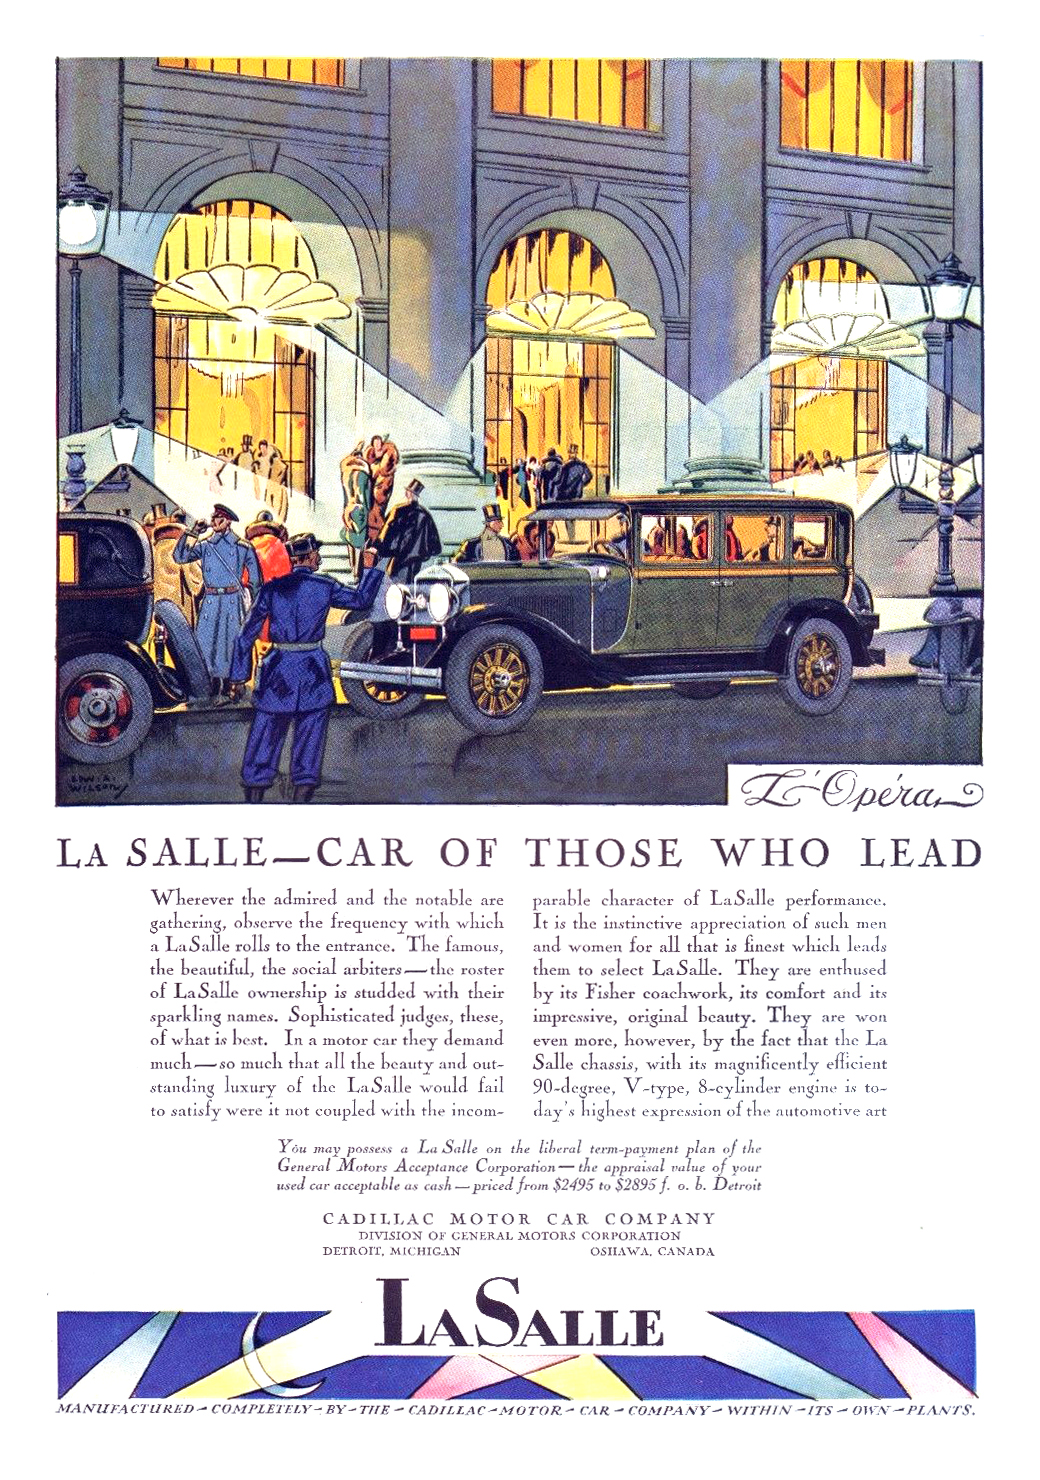 Cadillac/LaSalle Ad (December, 1927): L'Opéra - Illustrated by Edward A. Wilson